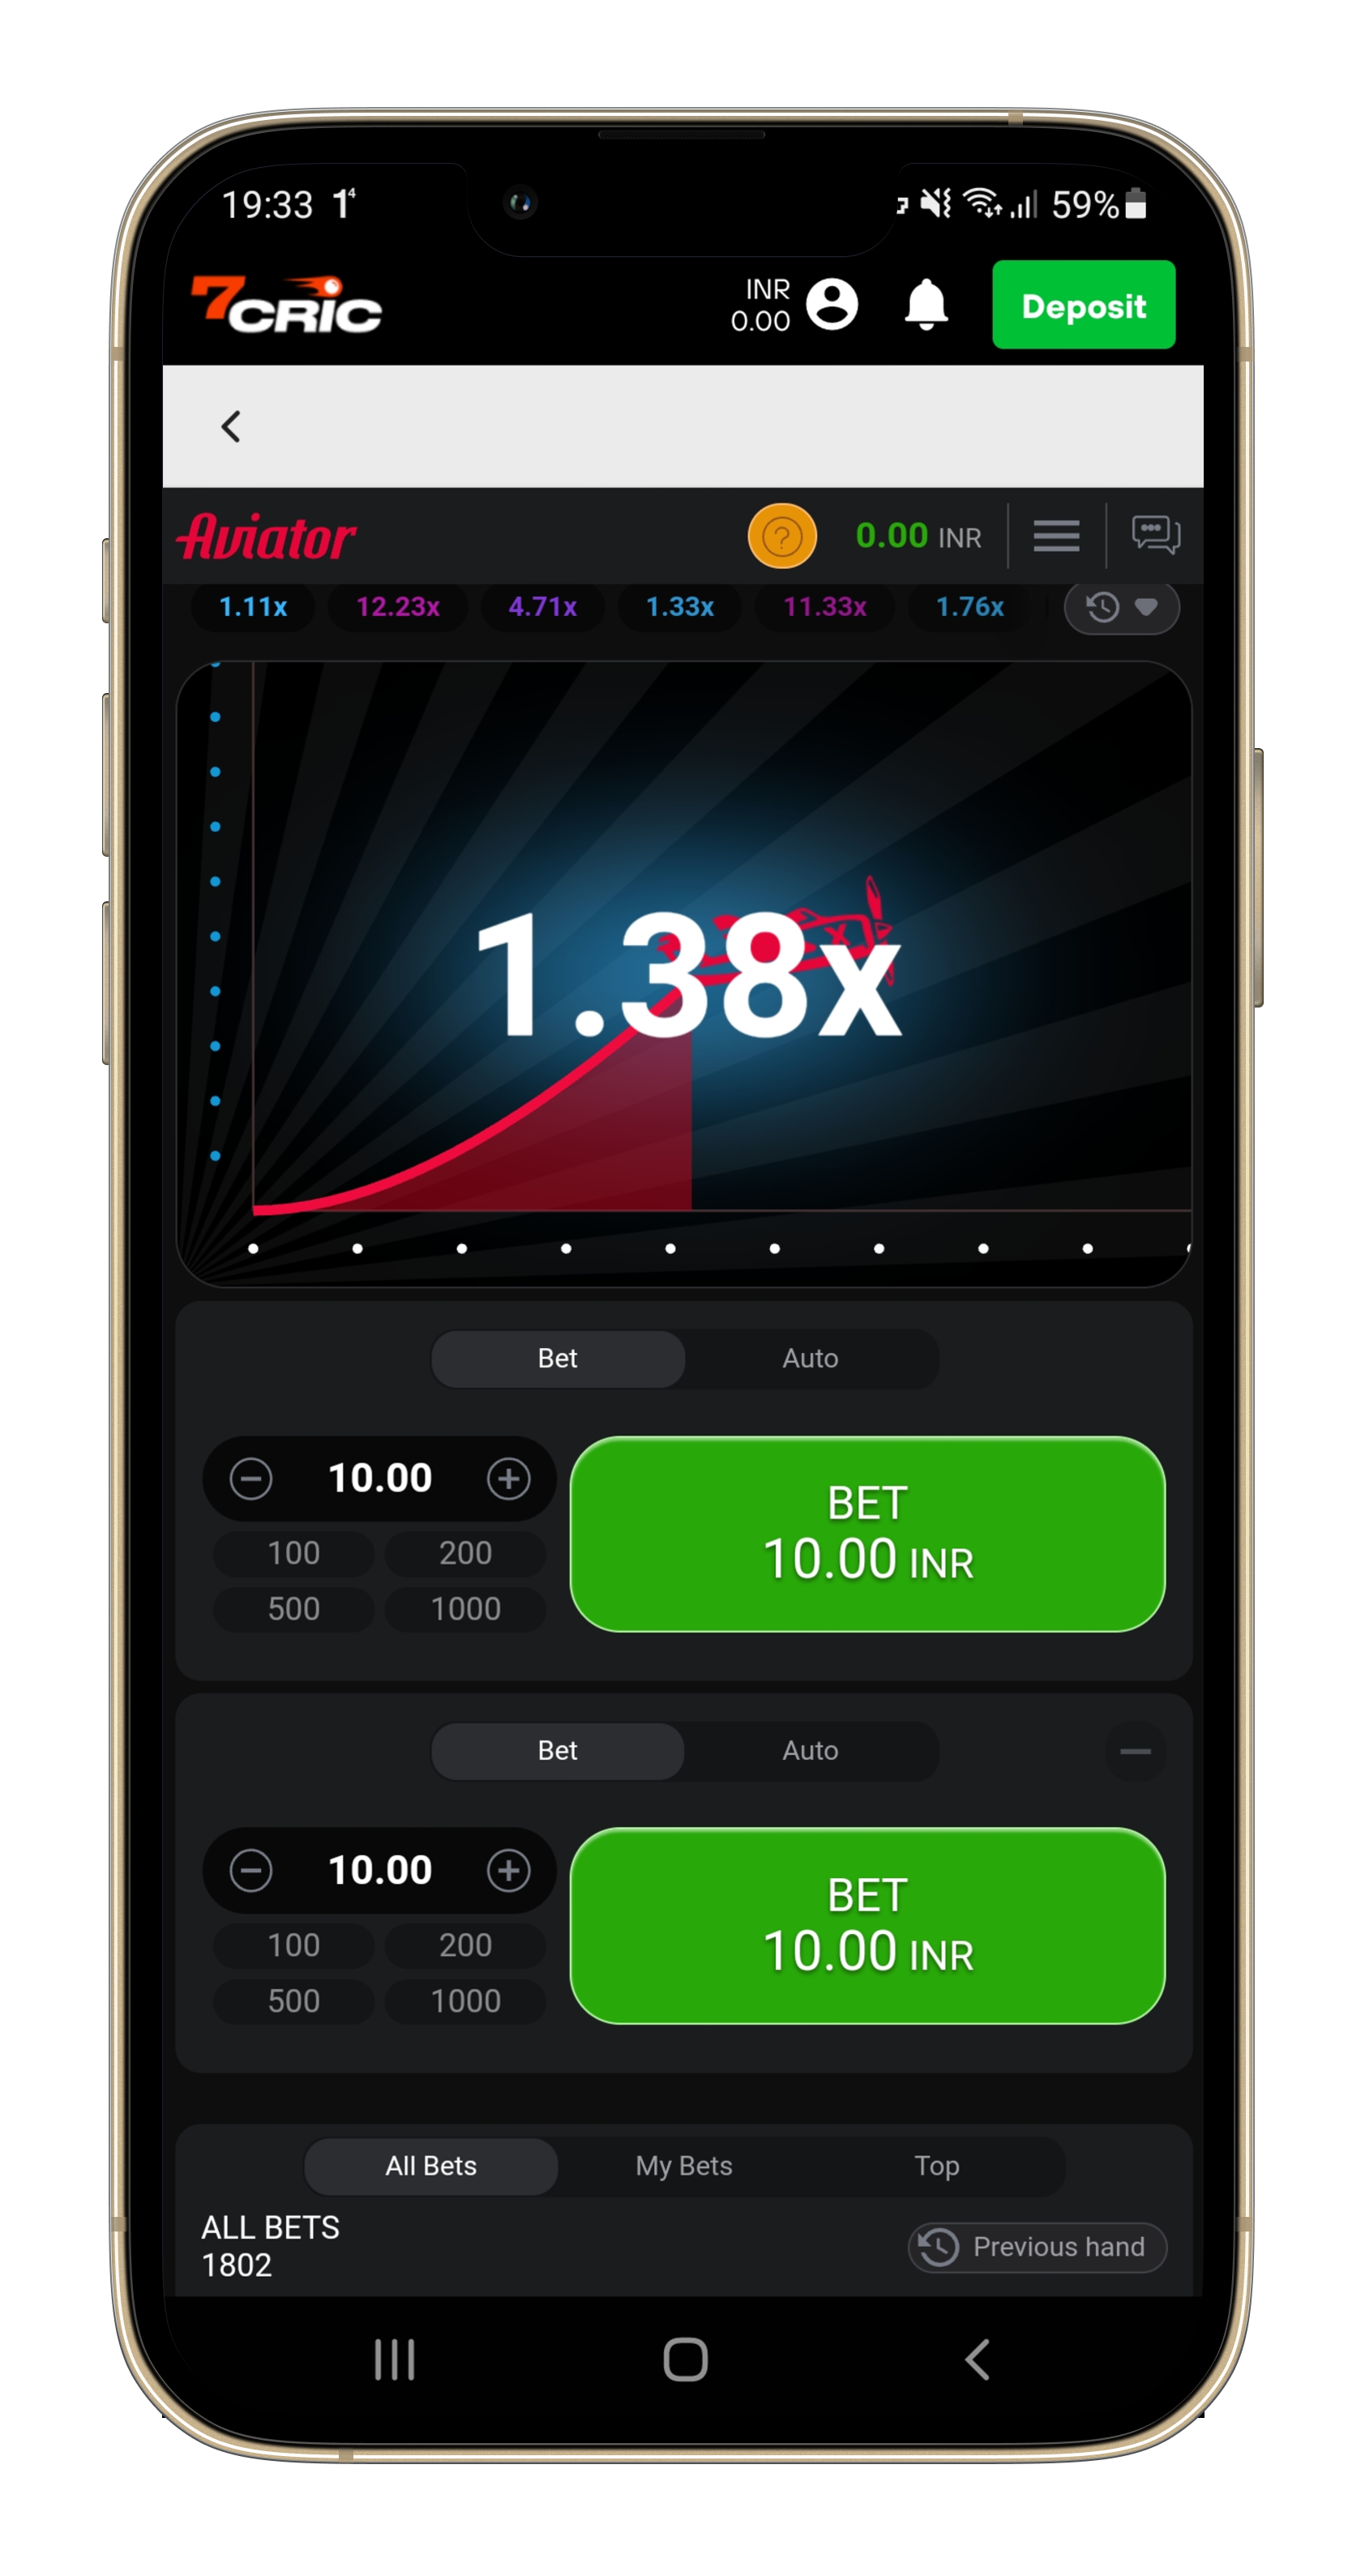 7cric-Aviator-game-app-betting-game.png